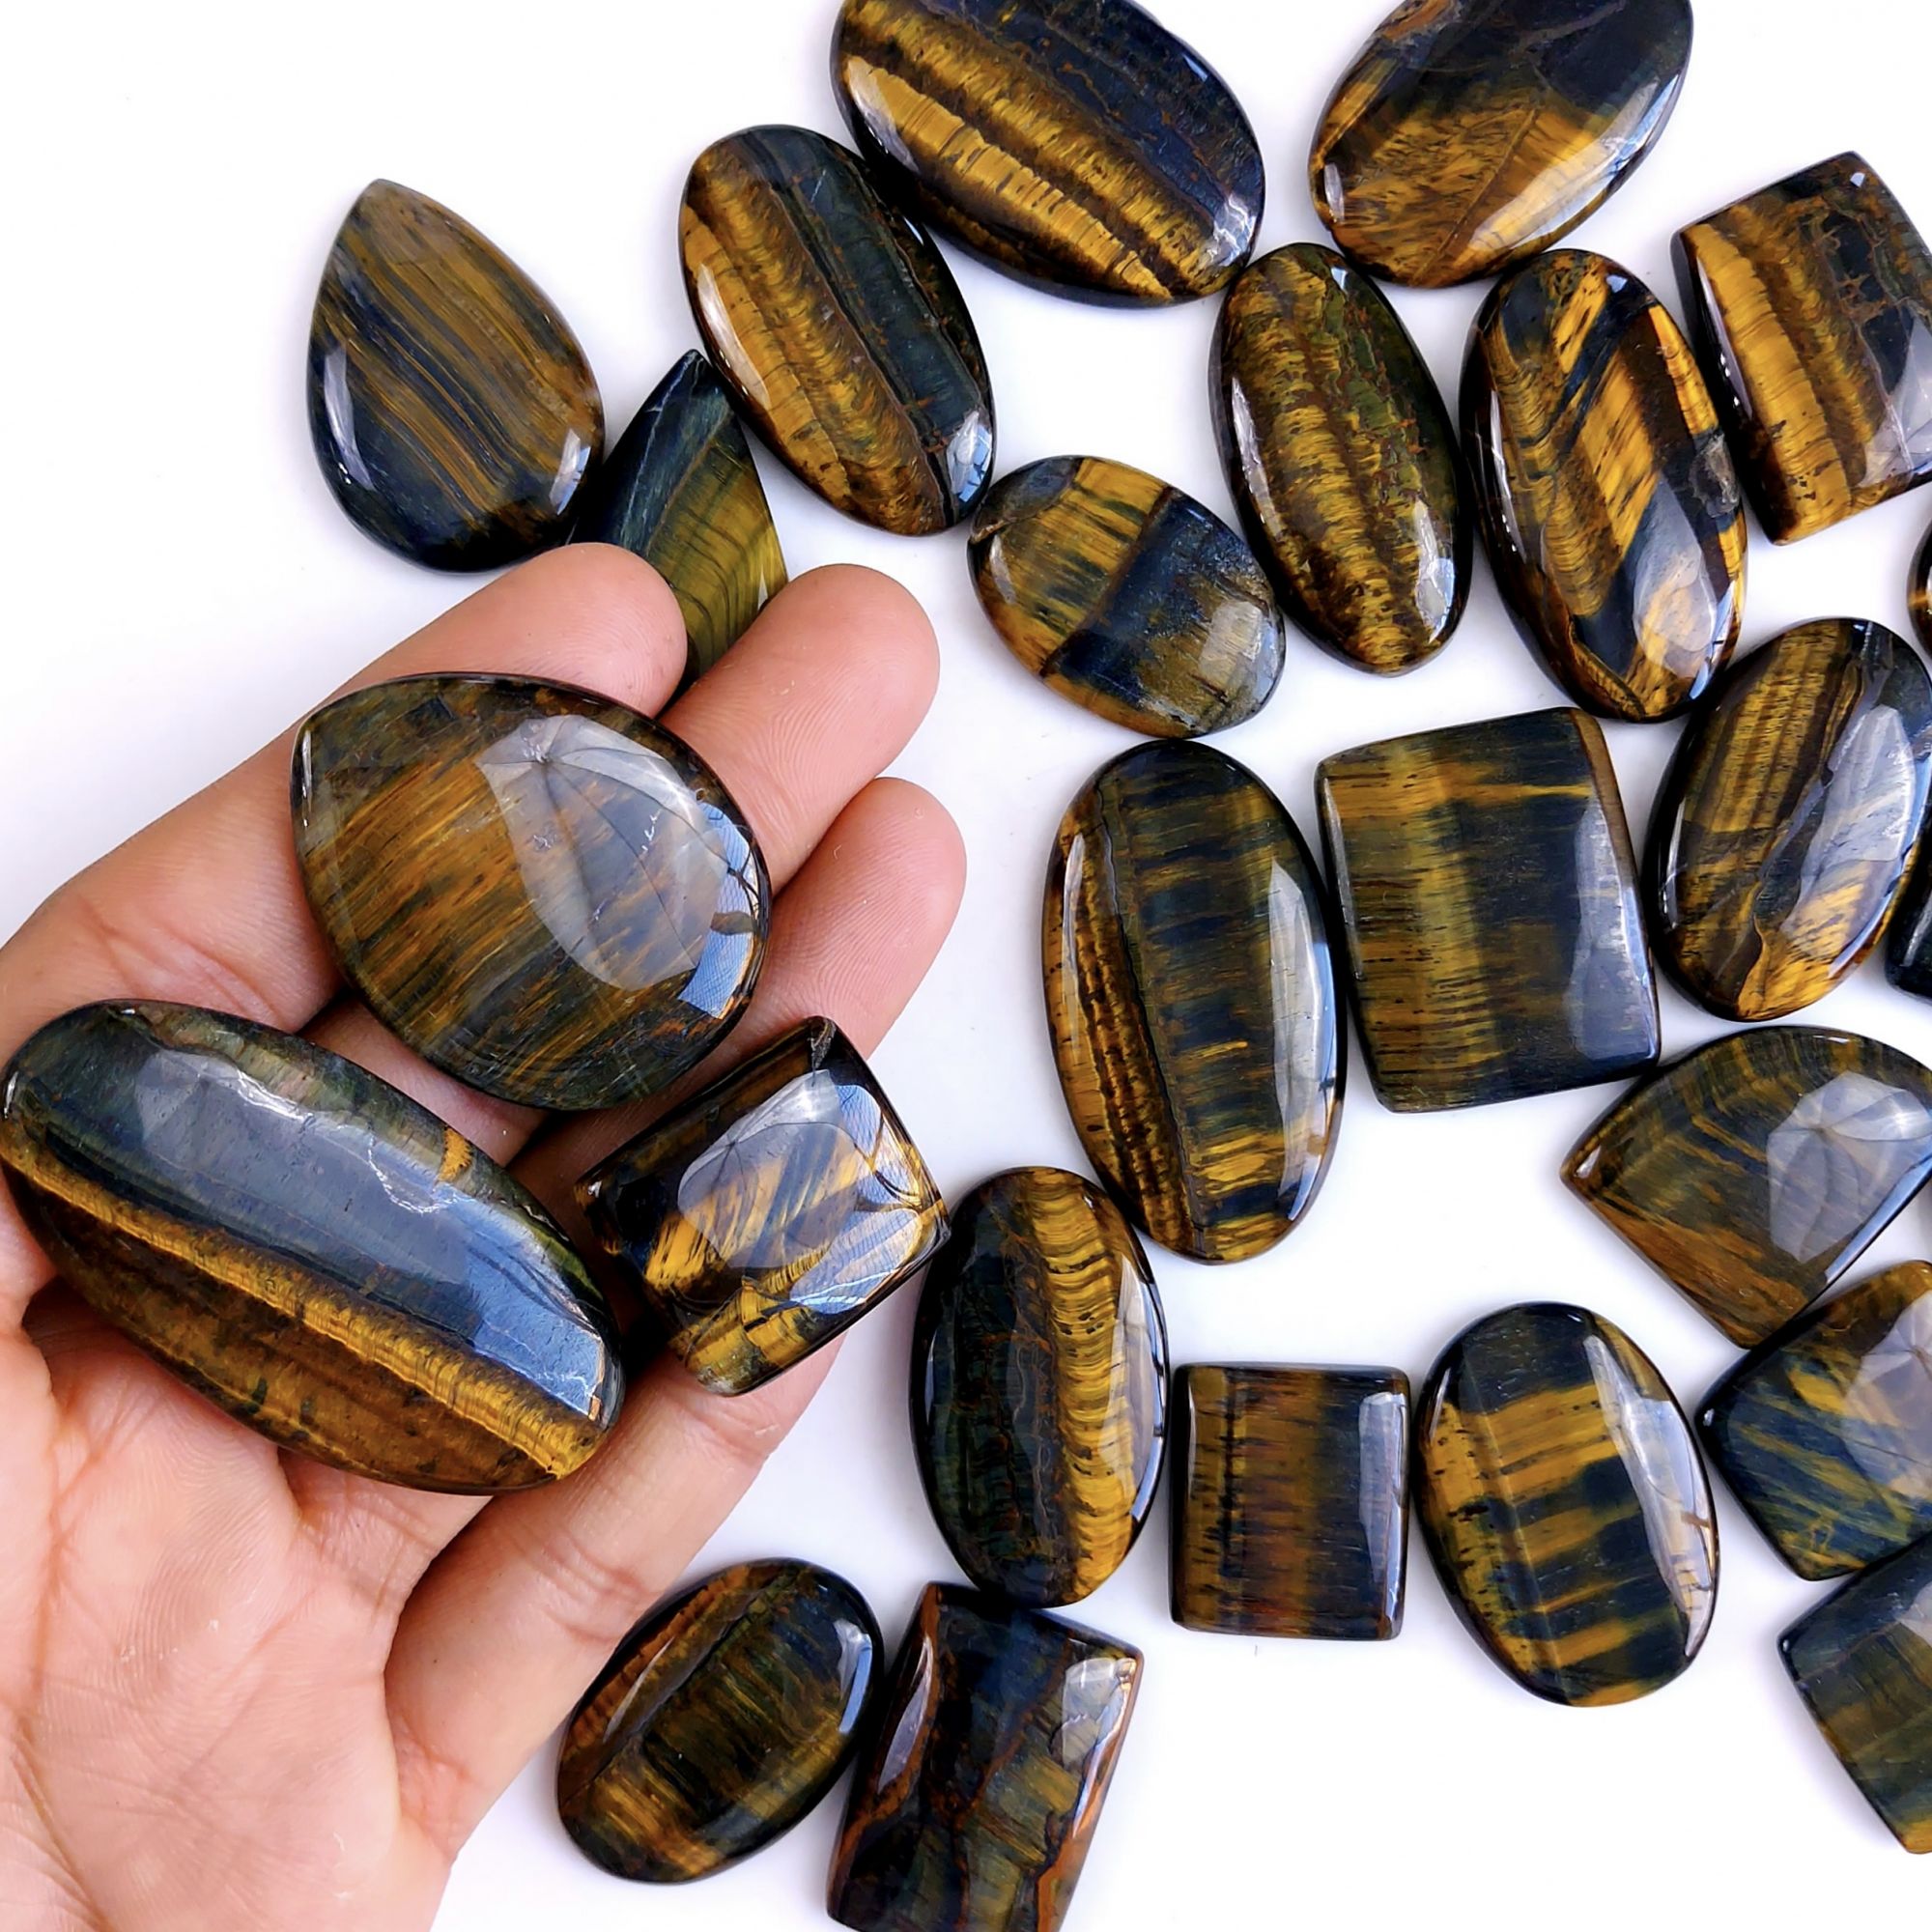 27Pcs 1177Cts Natural Tiger Eye Loose Cabochon Gemstone Lot Mix Shape and and Size for Jewelry Making 54x25 22x19mm#1303